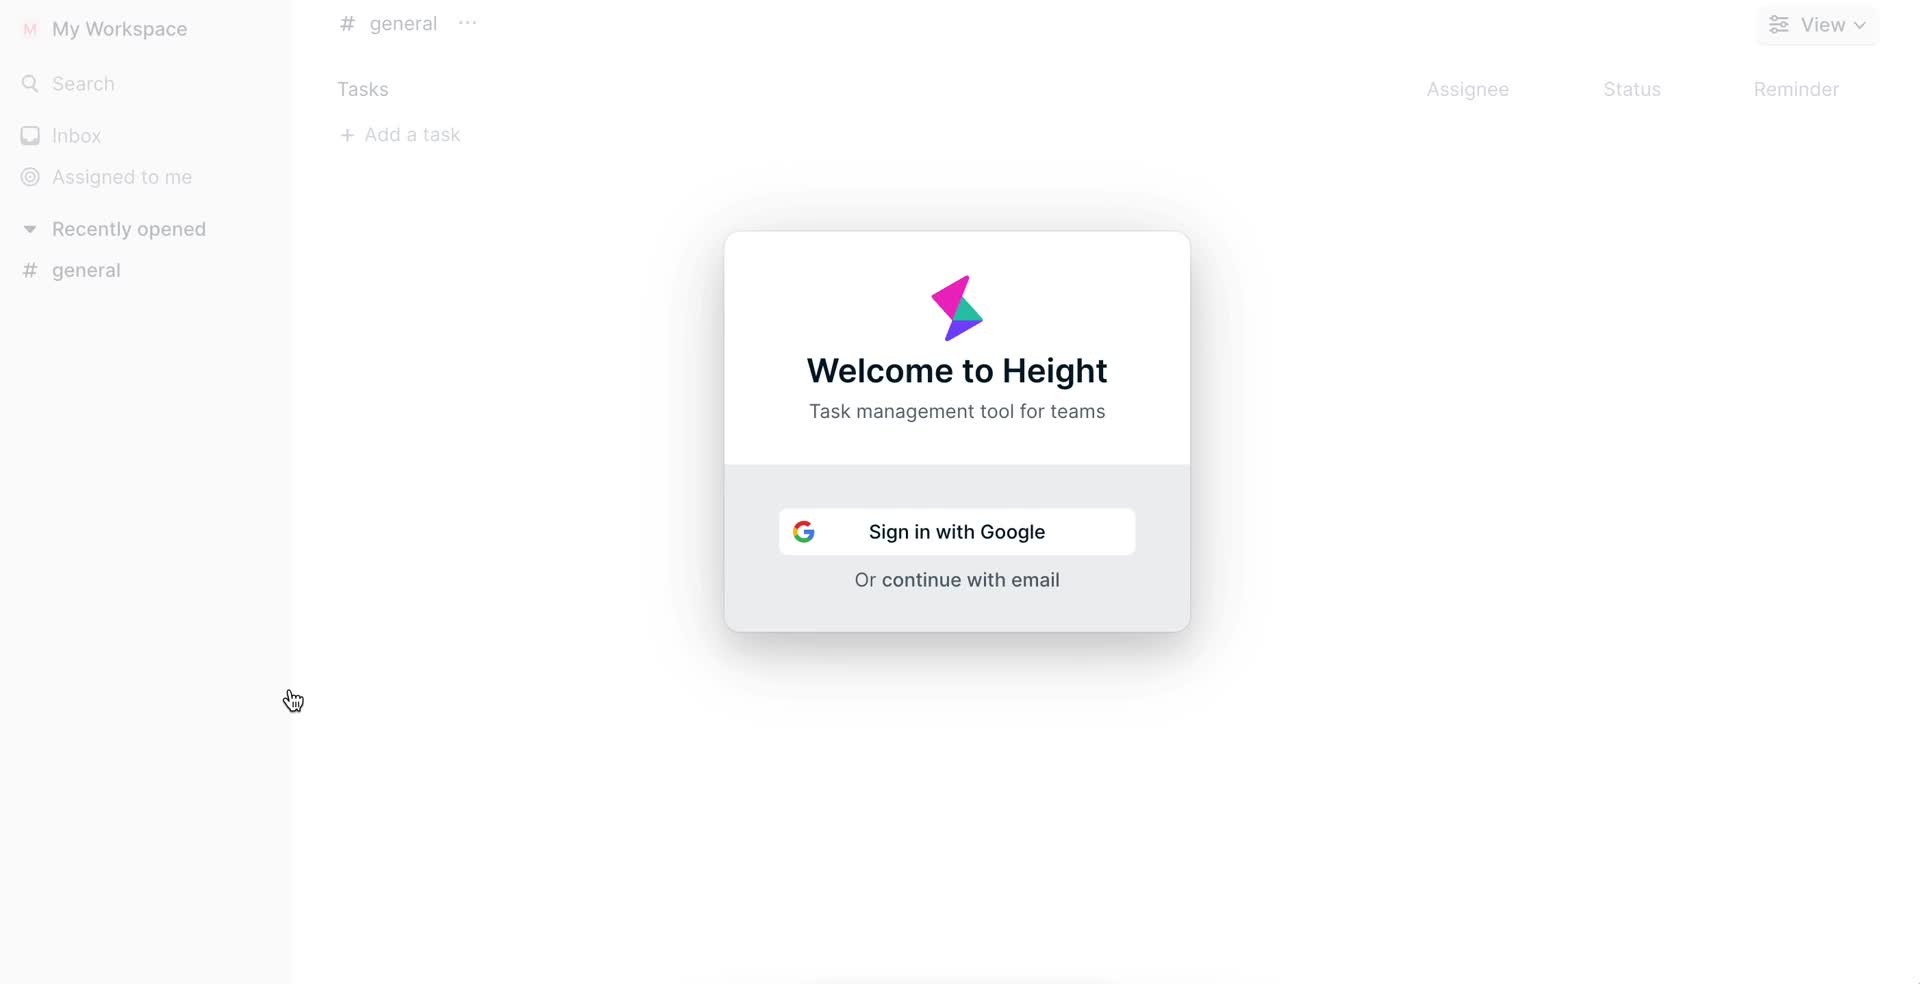 Screenshot of Sign up on Onboarding on Height user flow